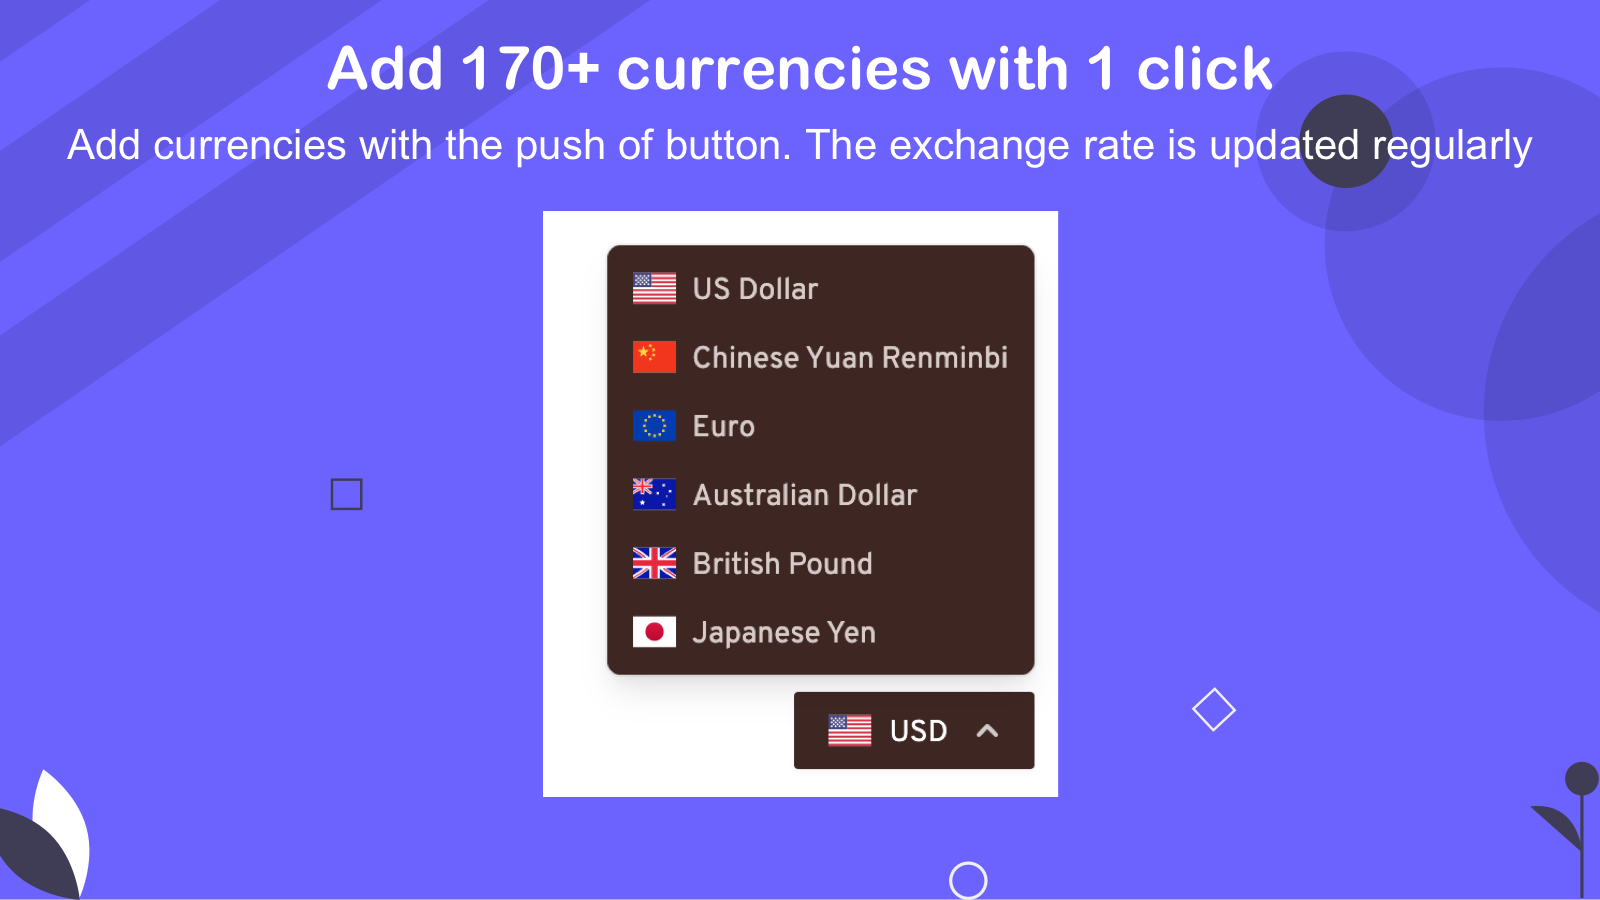 adding 170+ currencies with 1 click